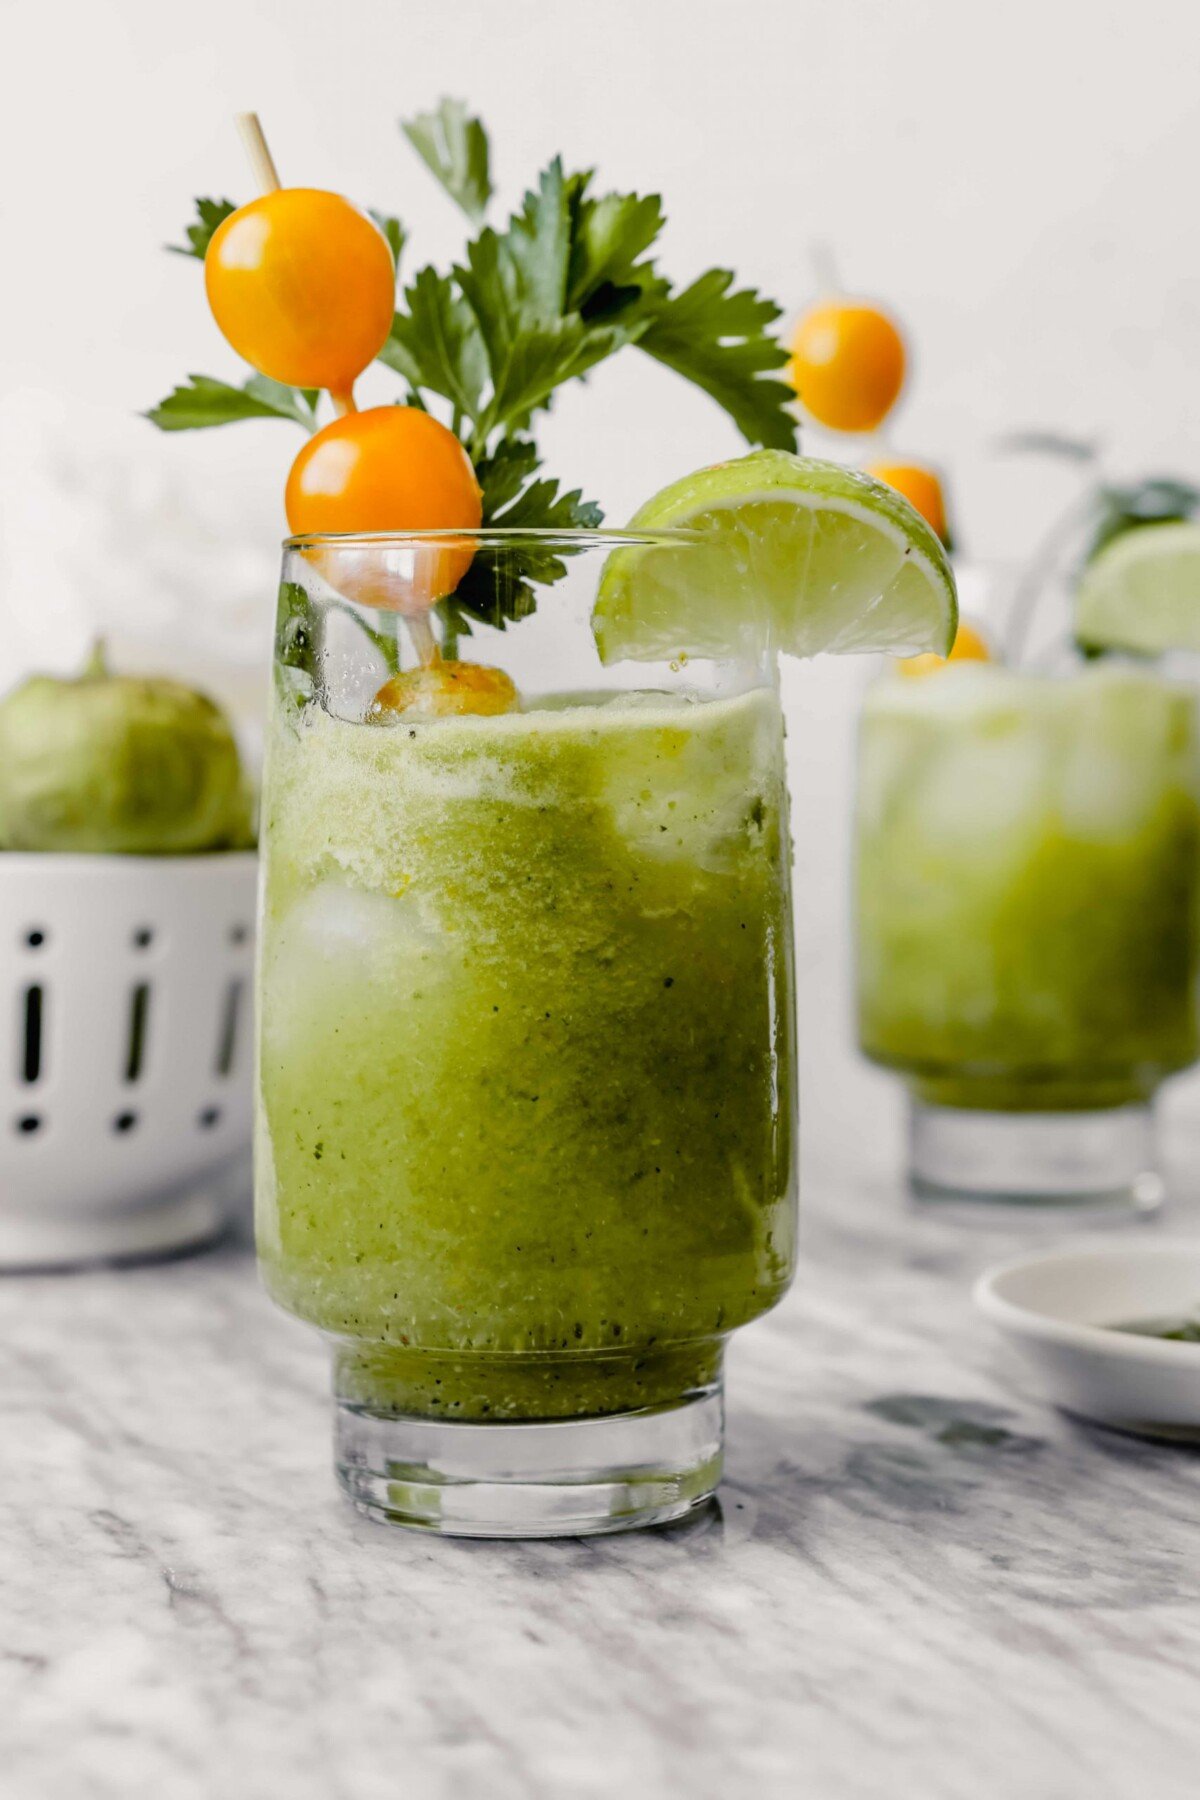 Photograph of green bloody mary in tall collins glass garnishes with yellow cherry tomatoes, herbs, lime wedge and apple slice.